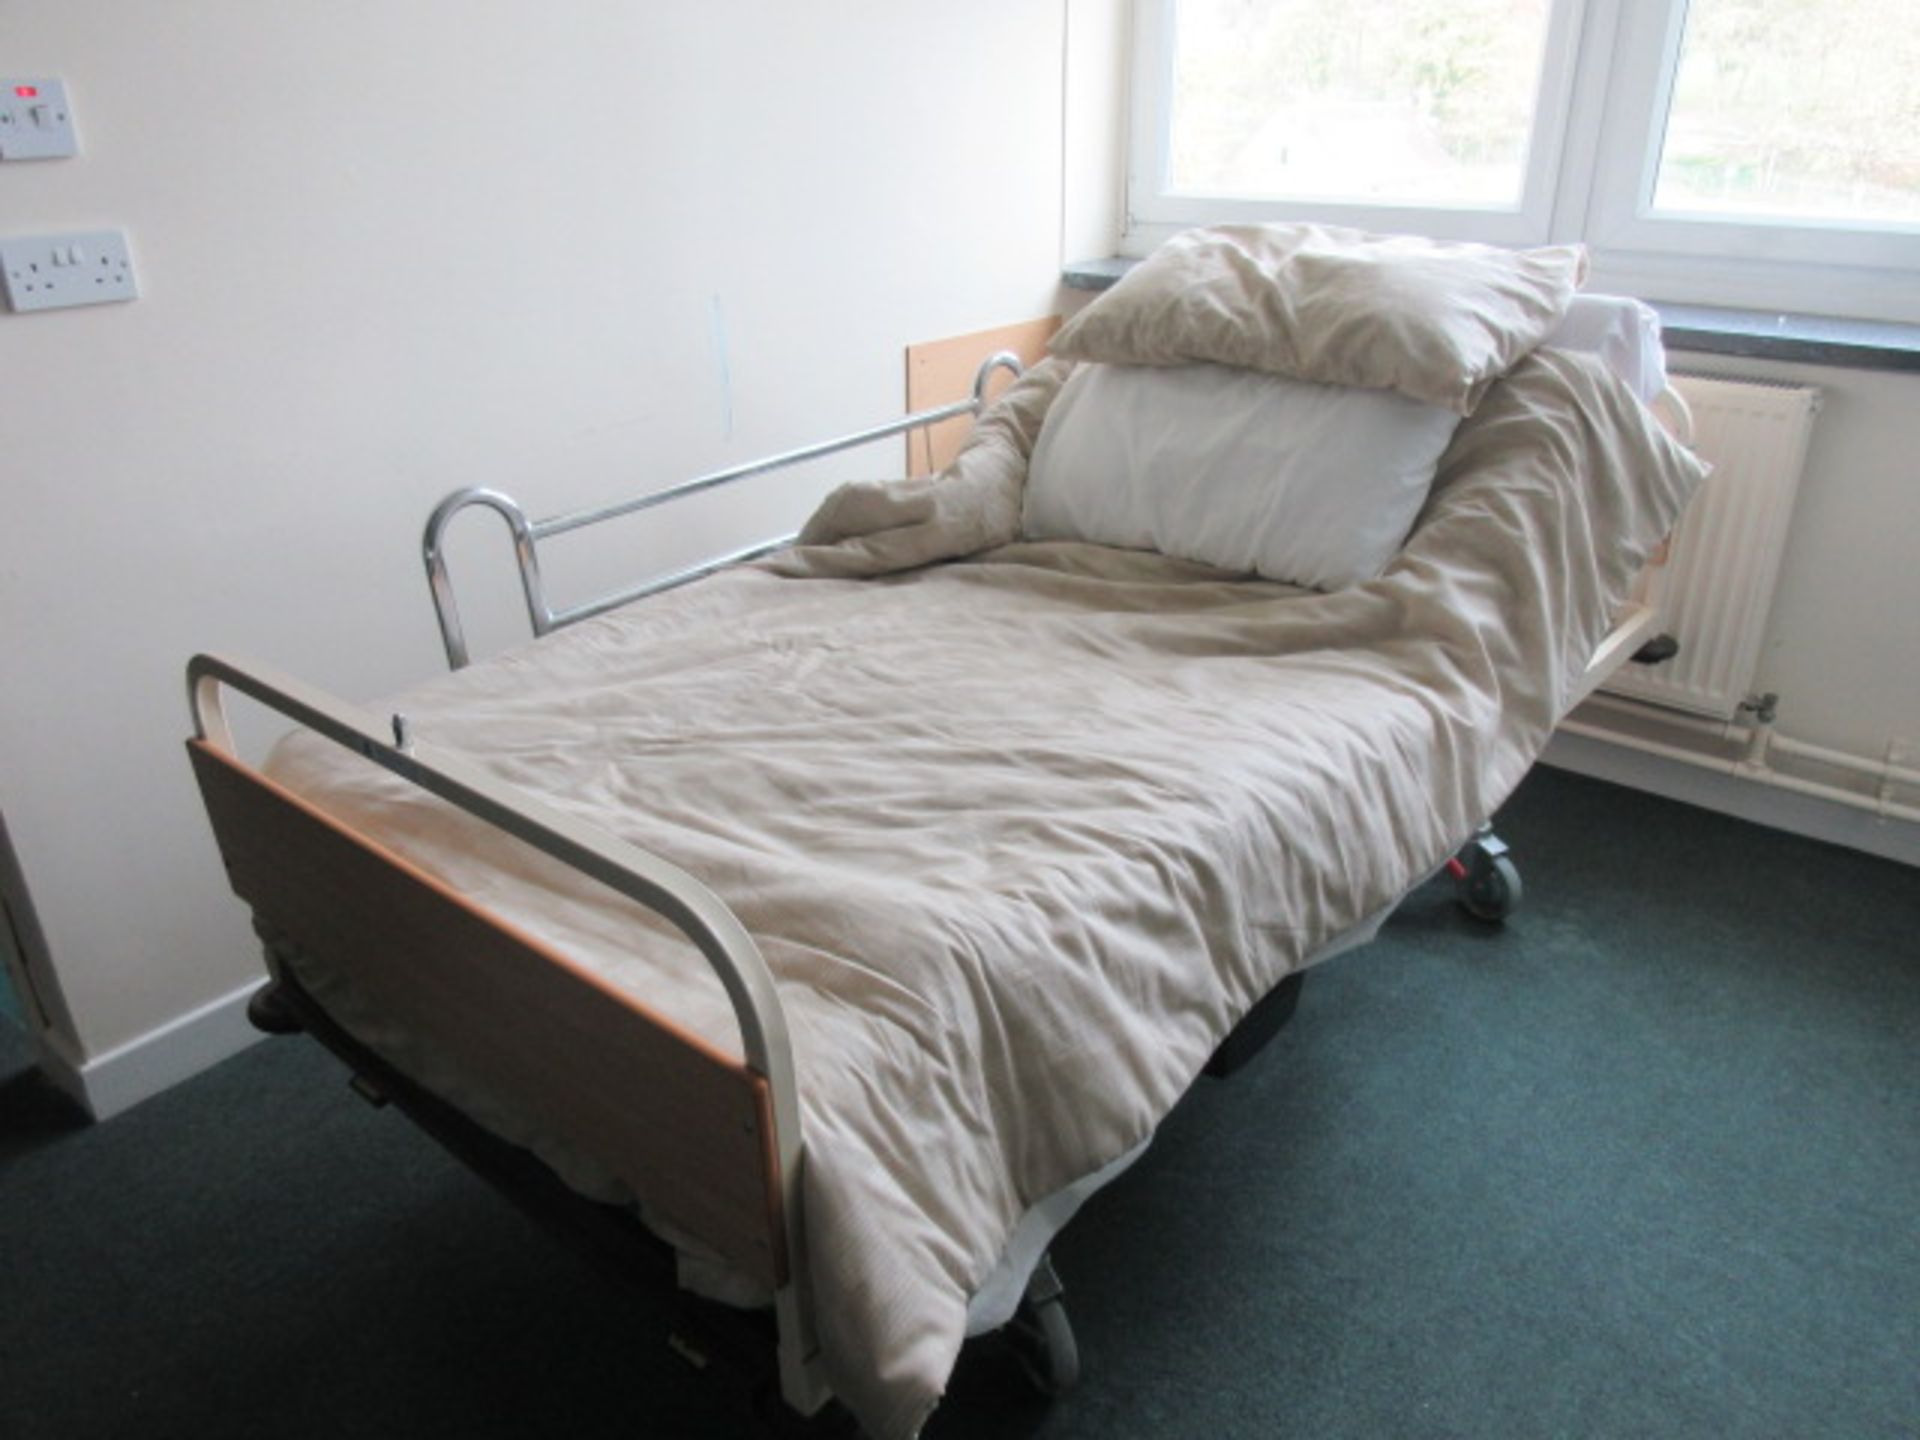 Huntleigh Nesbit Evans medical bed with powered rise & fall, tilting back rest. Holehouse Road.